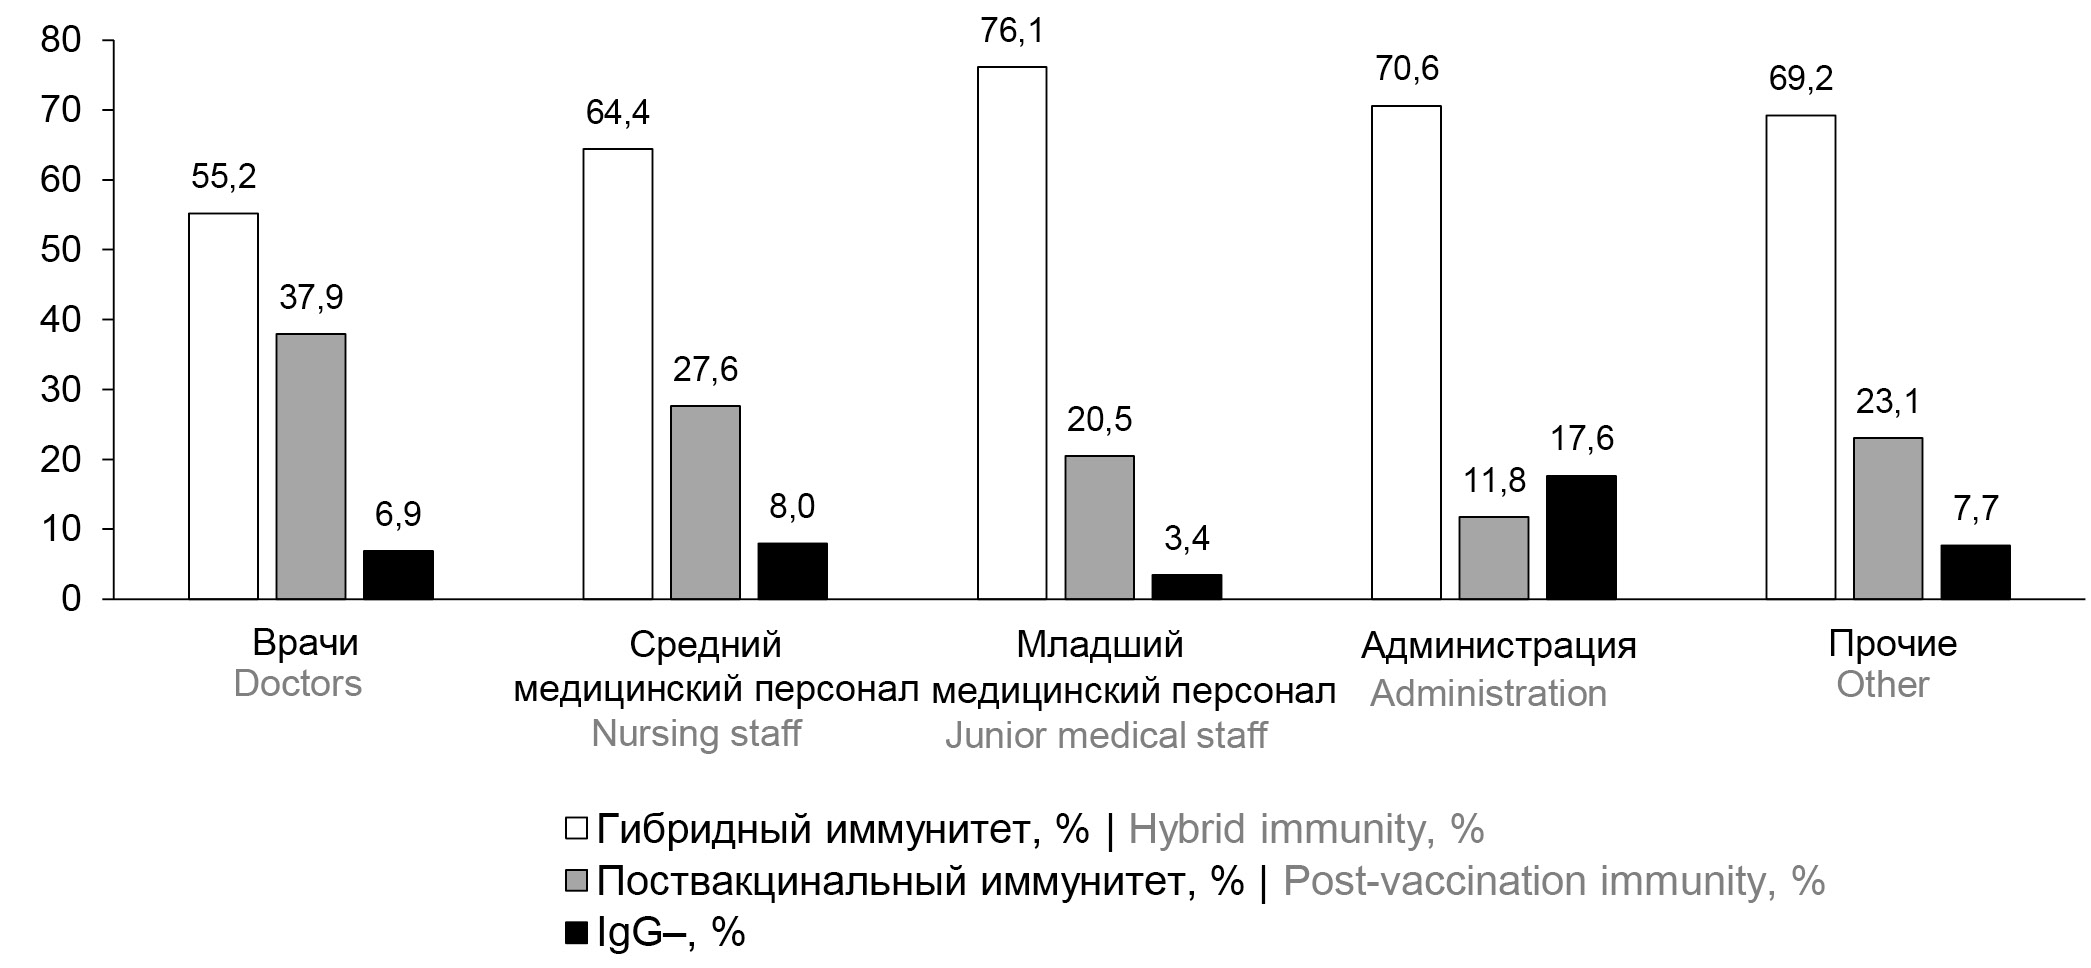 Assessment of humoral immunity to SARS-CoV-2 by a sample examination of medical workers in a large specialized multidisciplinary hospital